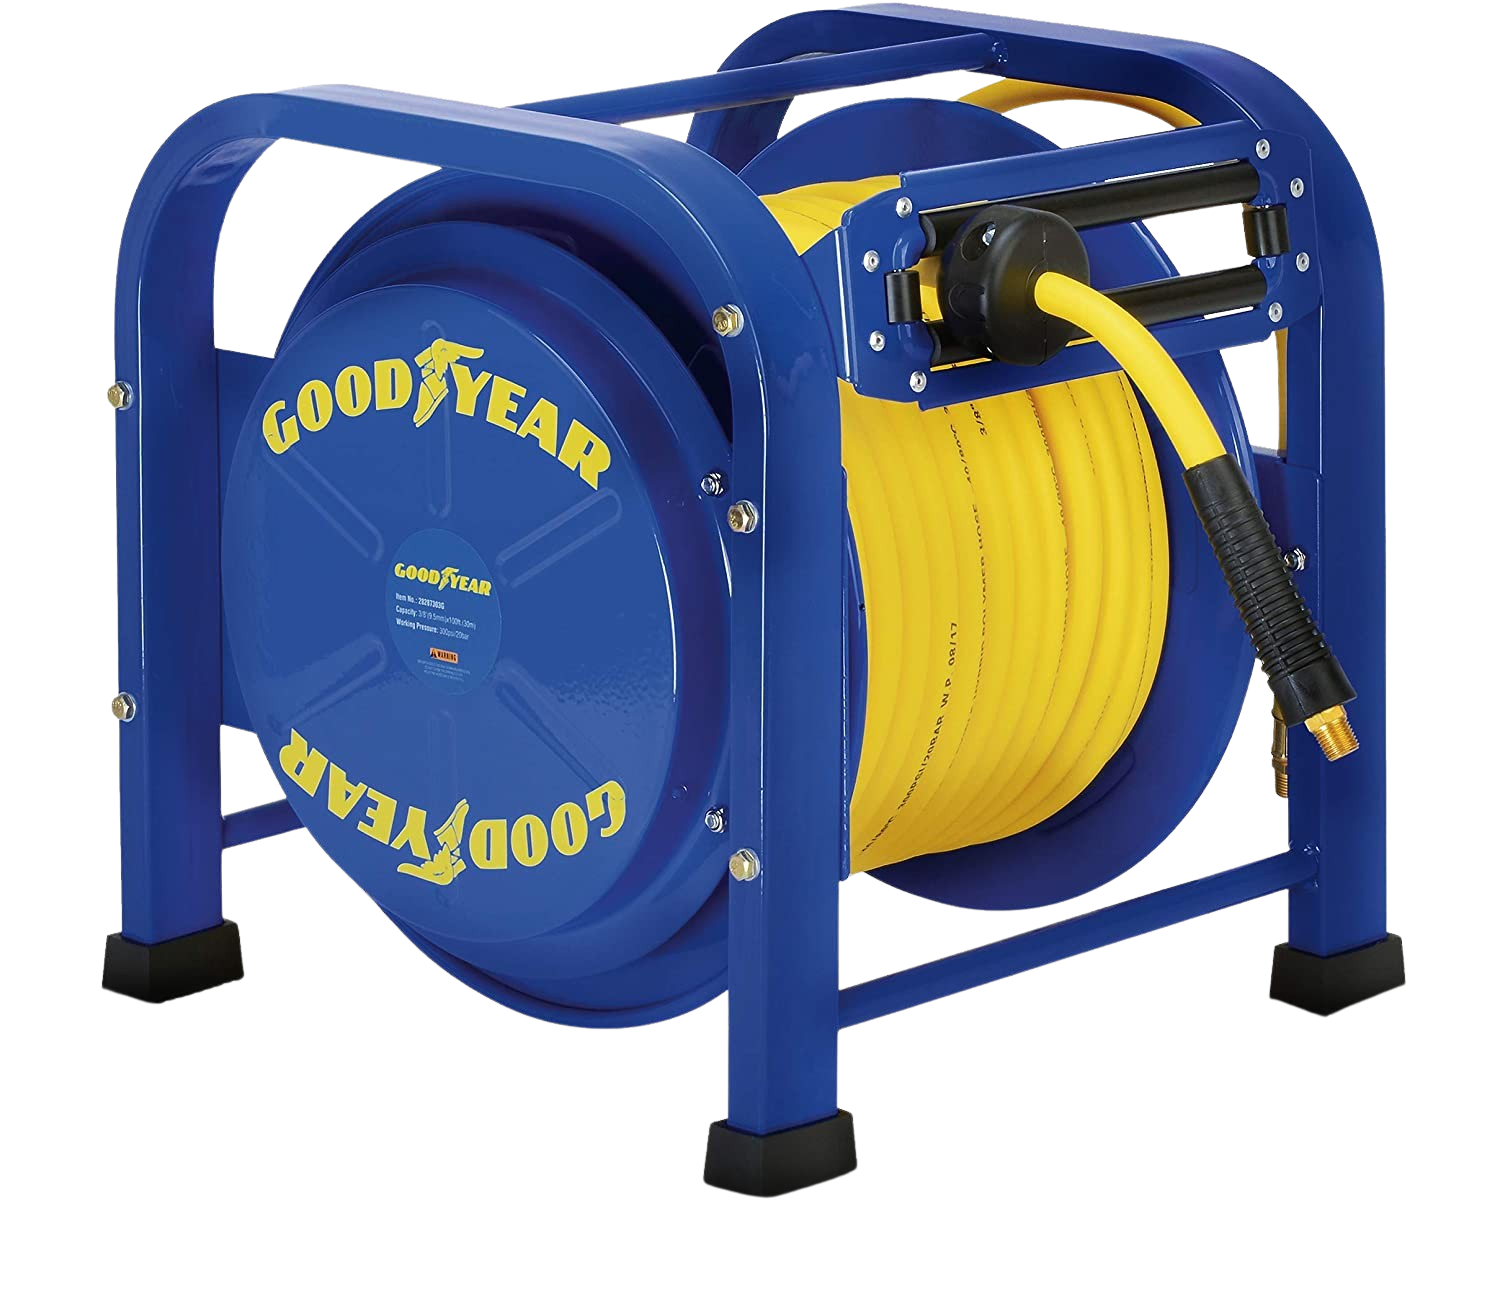 Goodyear, Goodyear 3/8" x 100' 3/8" MNPT Connections Portable Industrial Retractable Air Hose Reel New